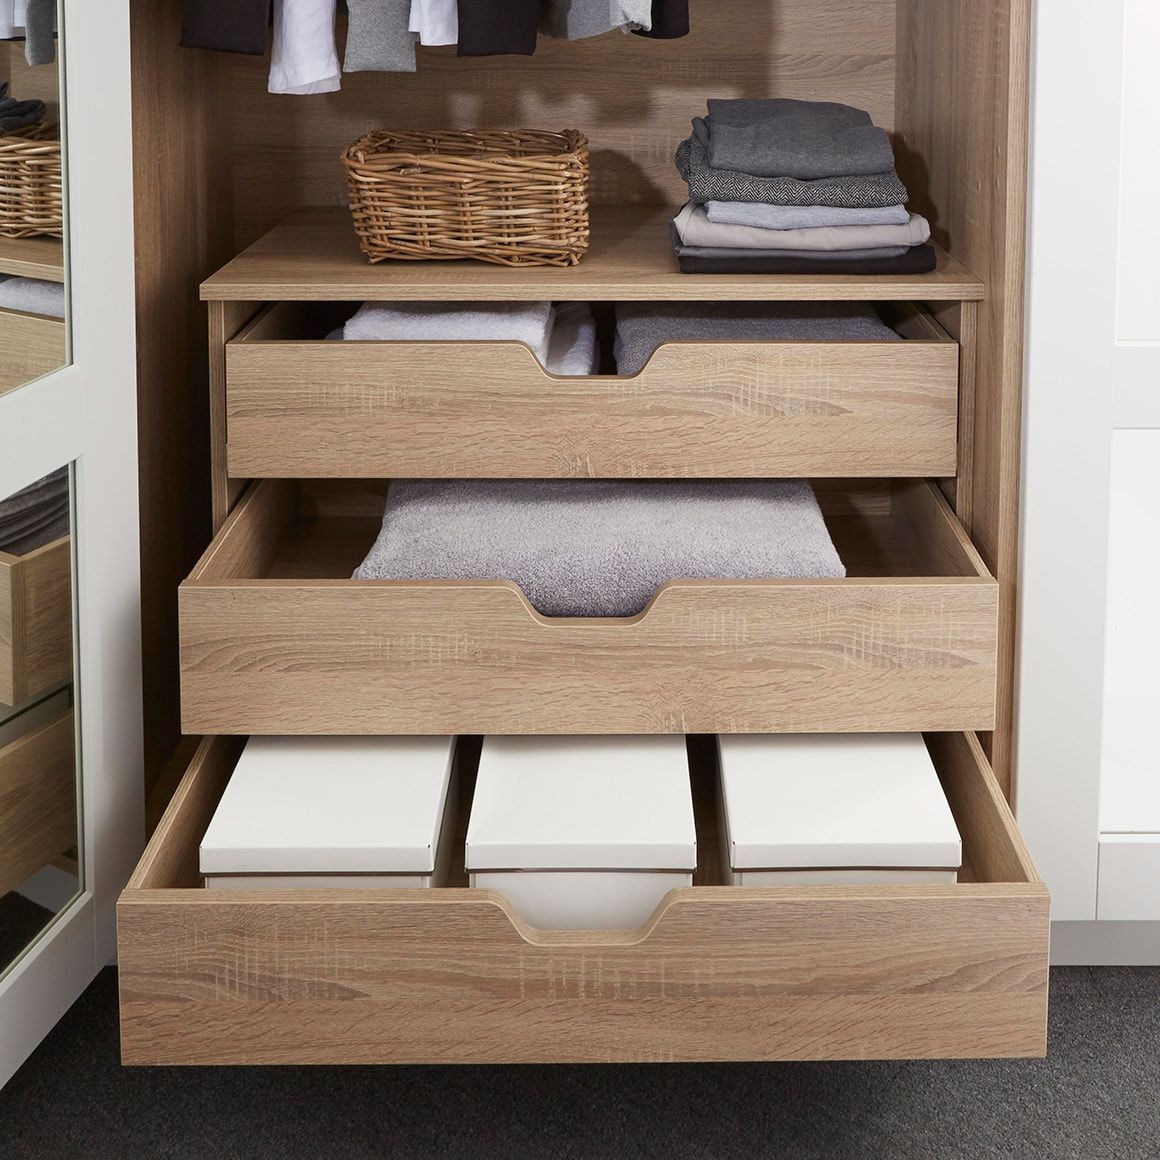 Wardrobe Storage Solutions Ireland | The Panelling Centre Regarding Oak Wardrobes With Drawers And Shelves (Gallery 15 of 20)